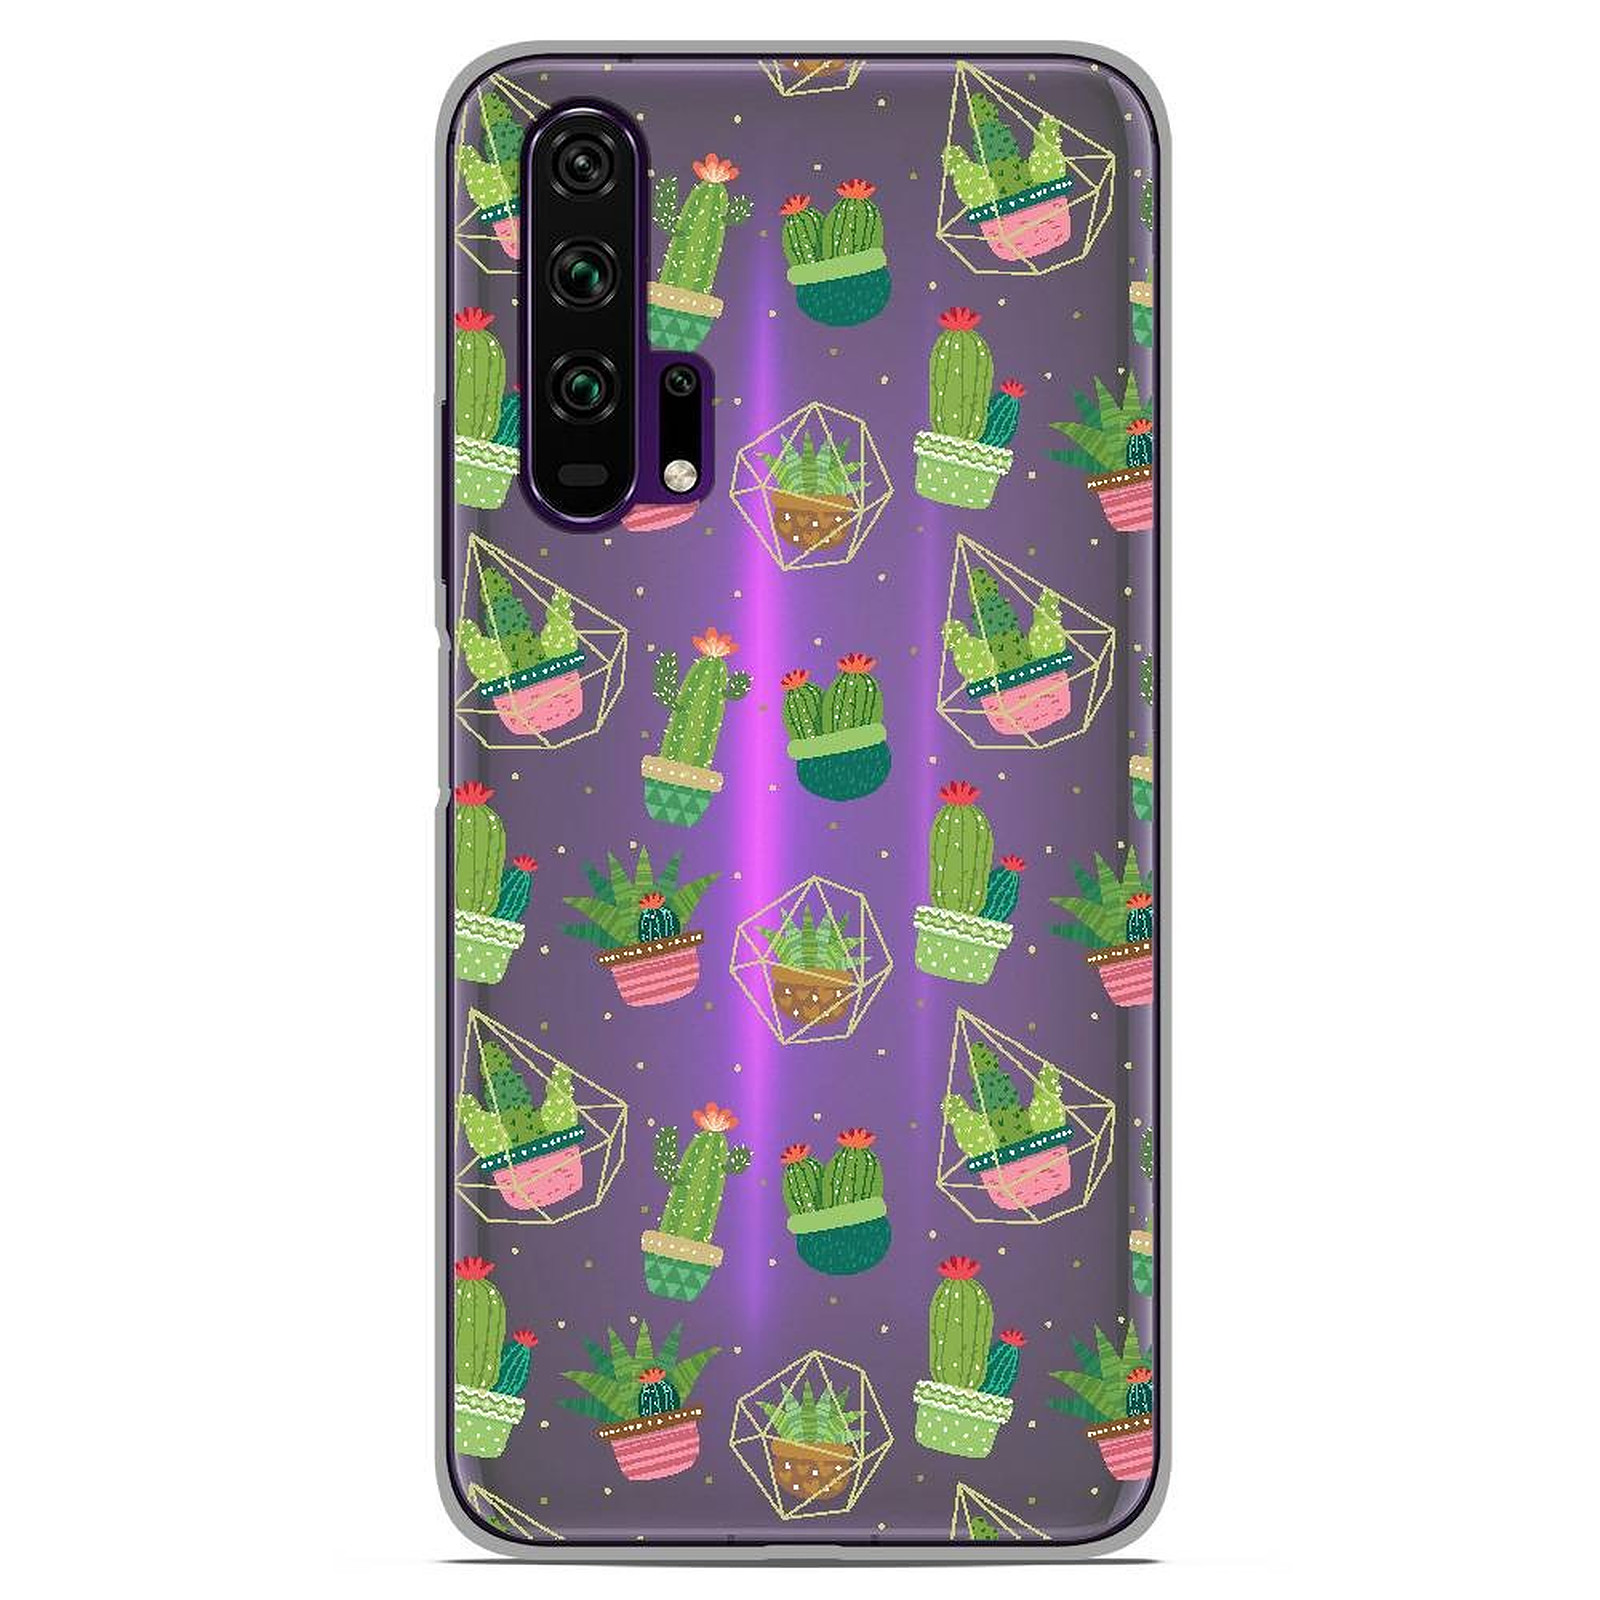 1001 Coques Coque silicone gel Huawei Honor 20 Pro motif Cactus - Coque telephone 1001Coques